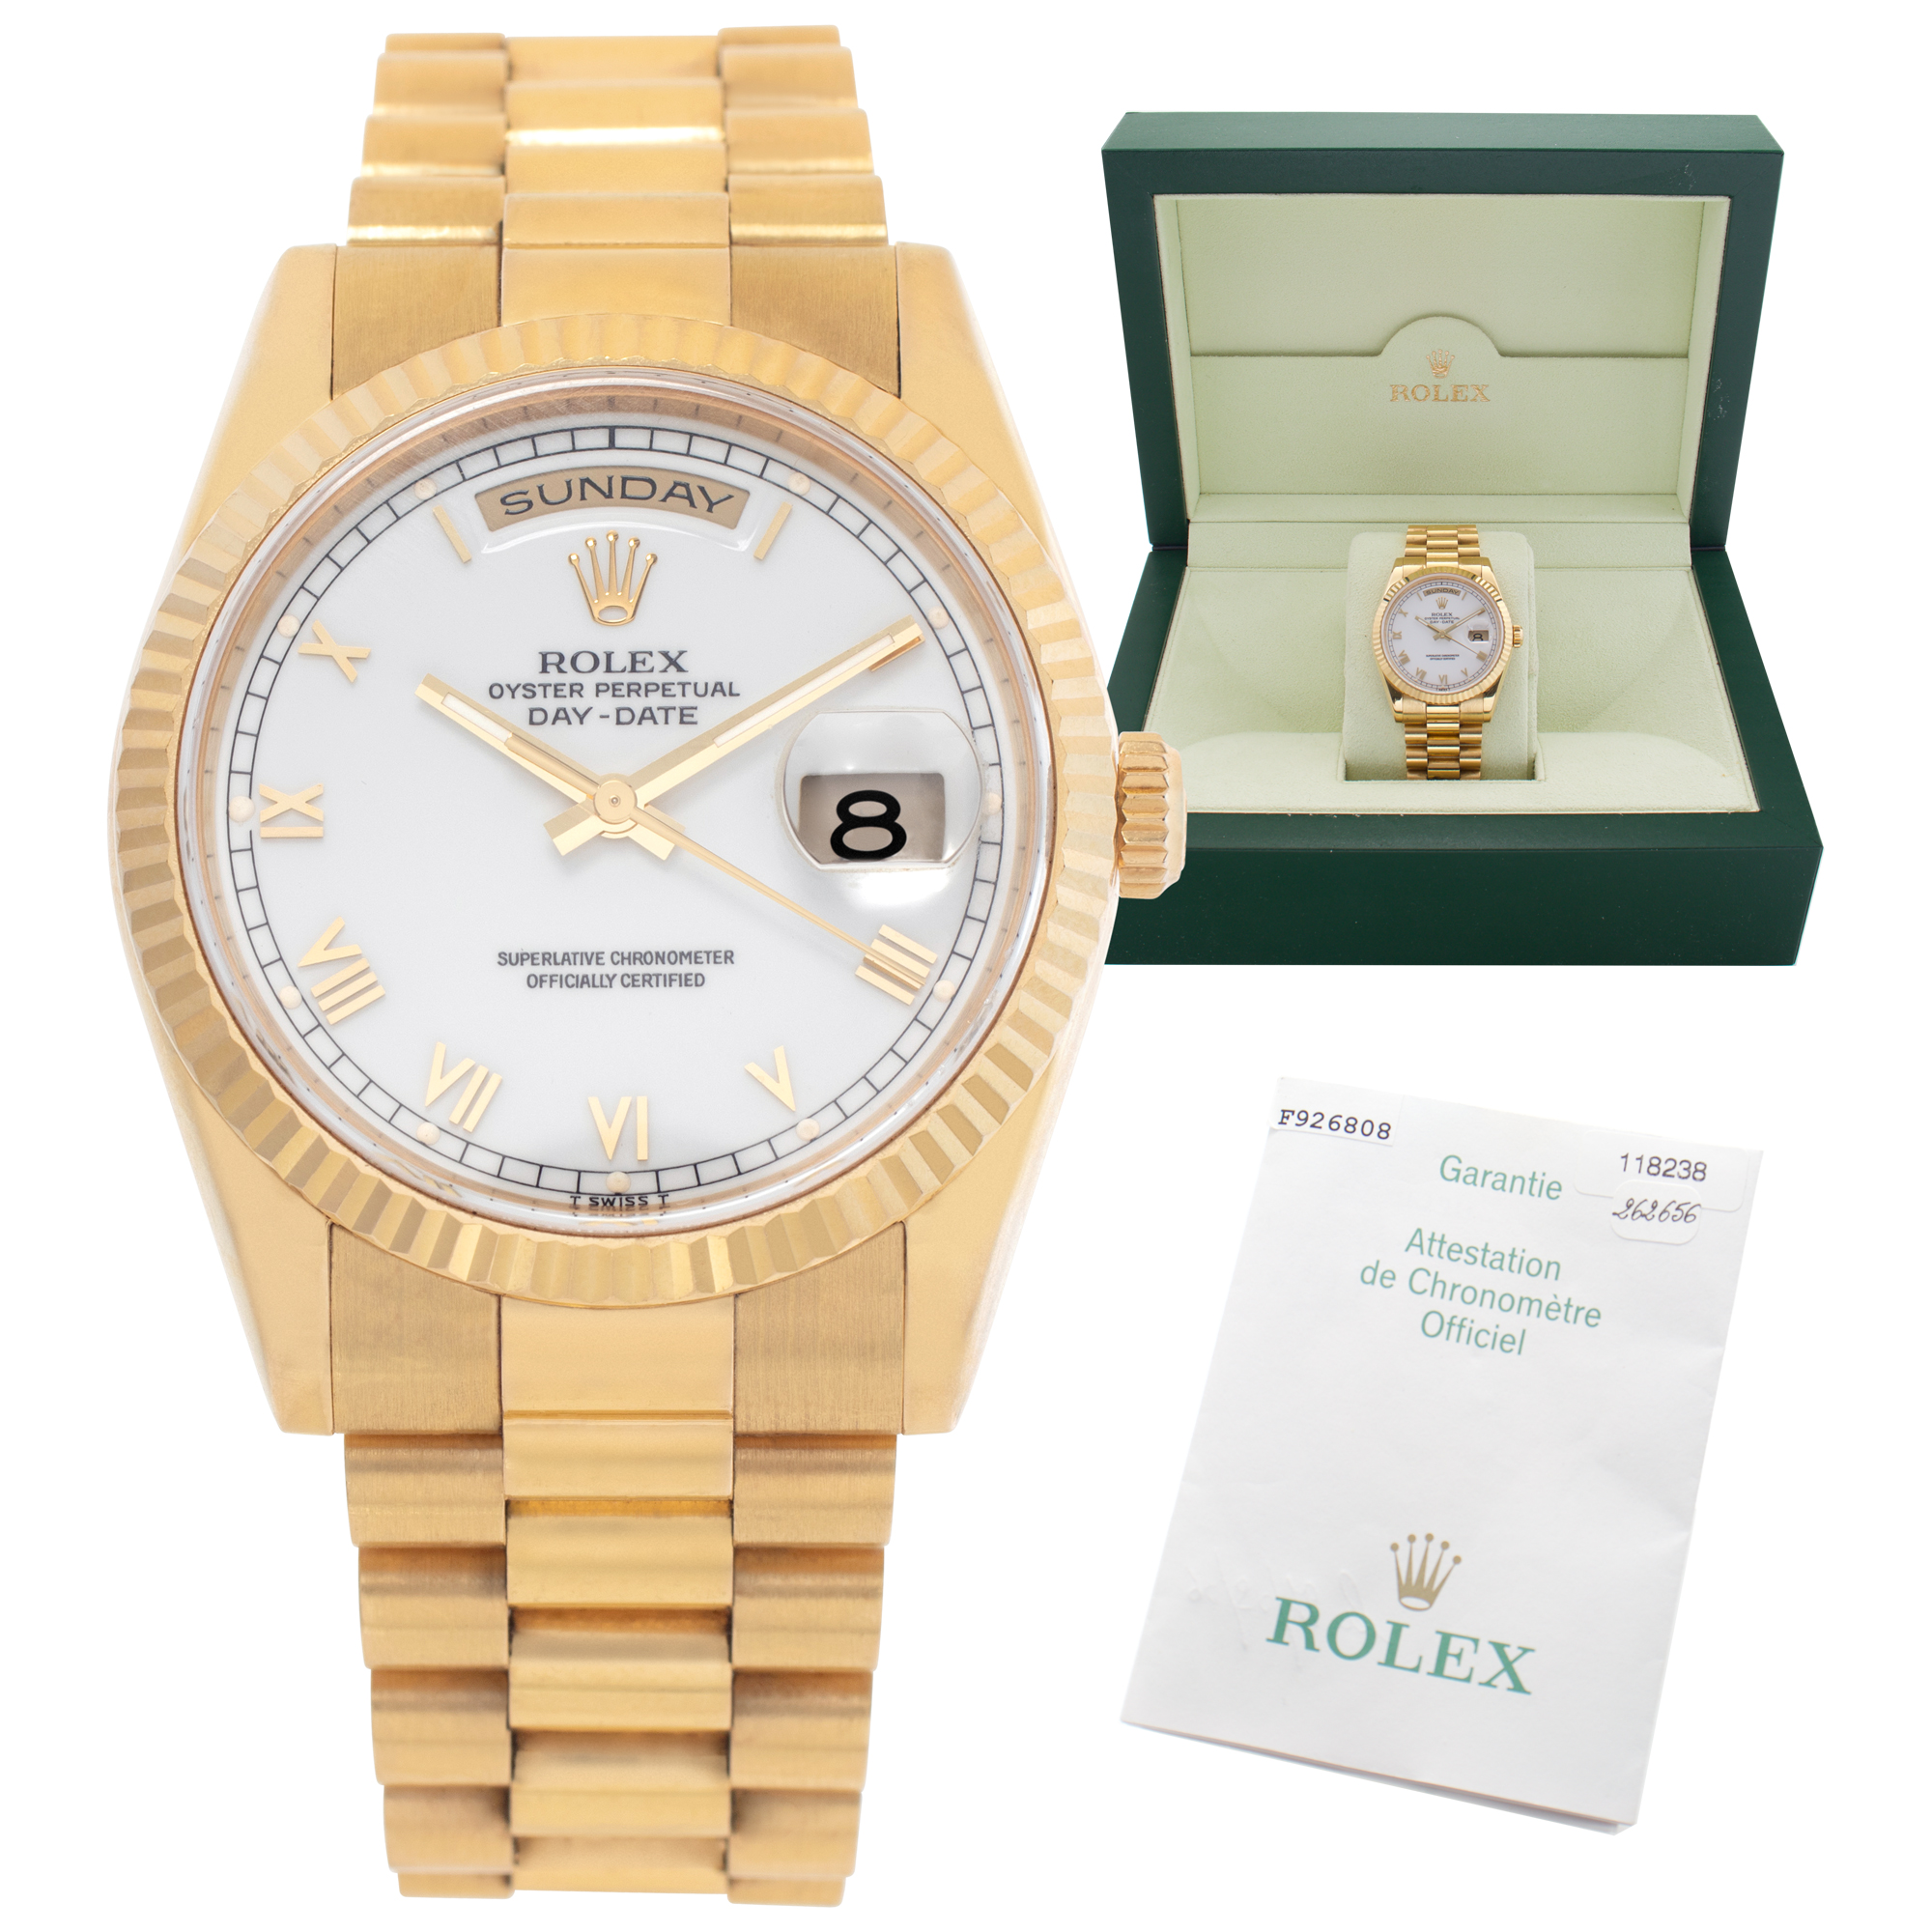 Rolex Day-Date 36mm 118238 image 7